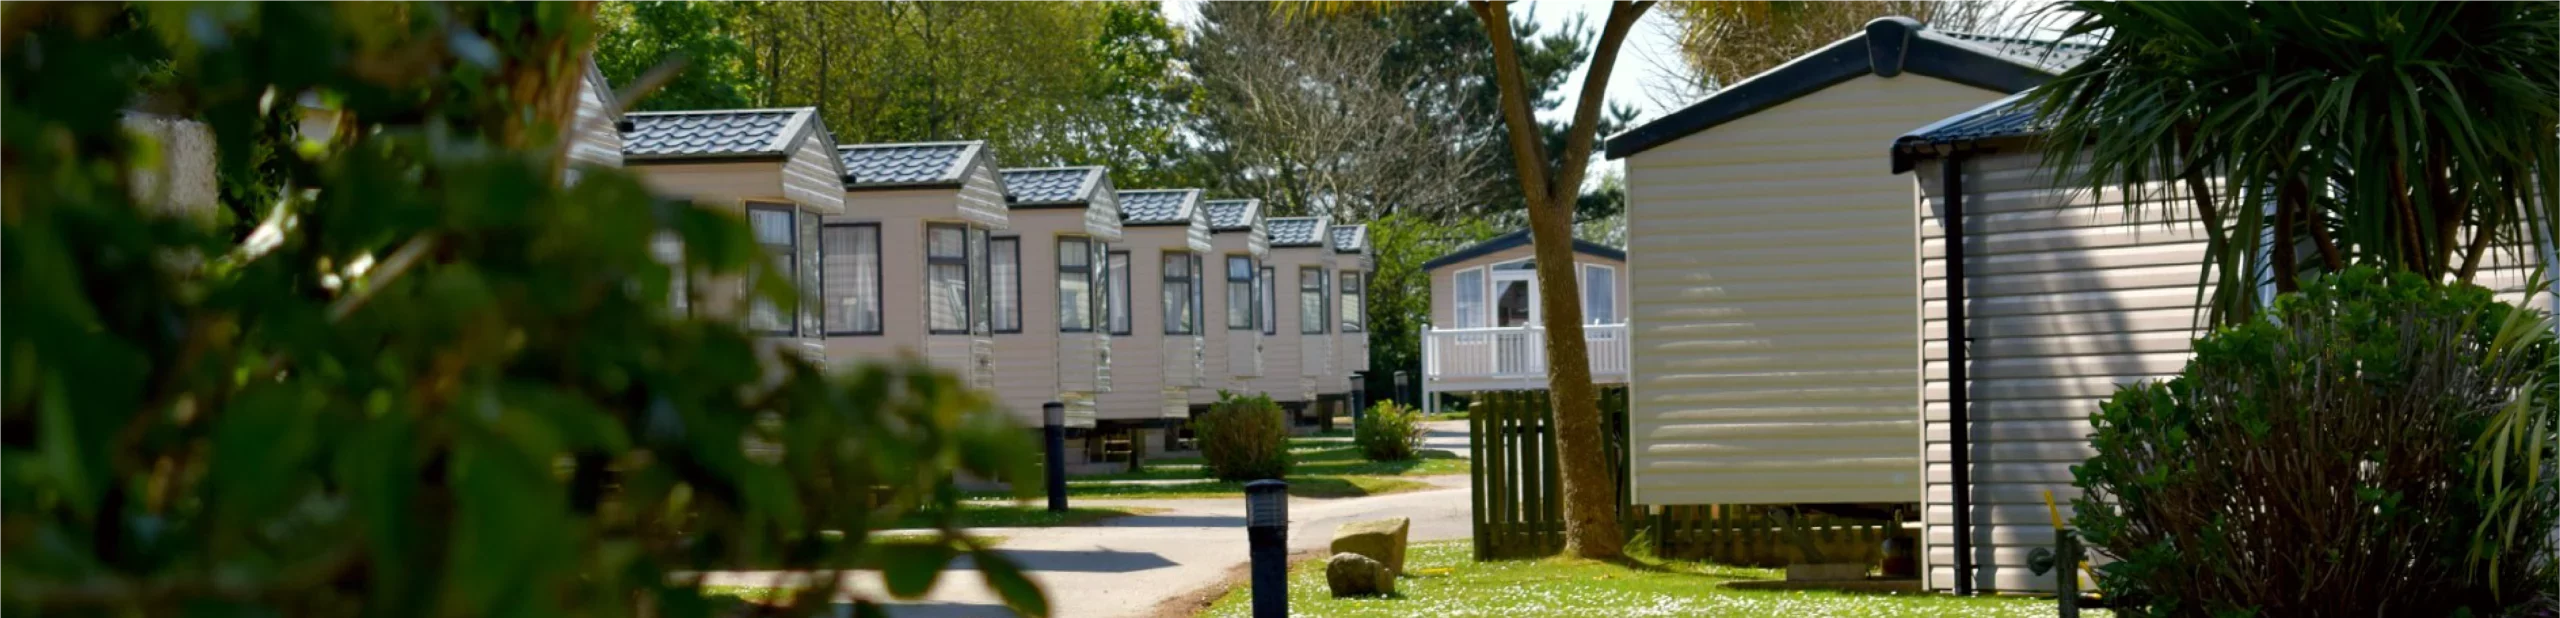 A row of modern mobile homes with grey roofs, neatly aligned in a sunny caravan park with lush green trees and a clear path running through.